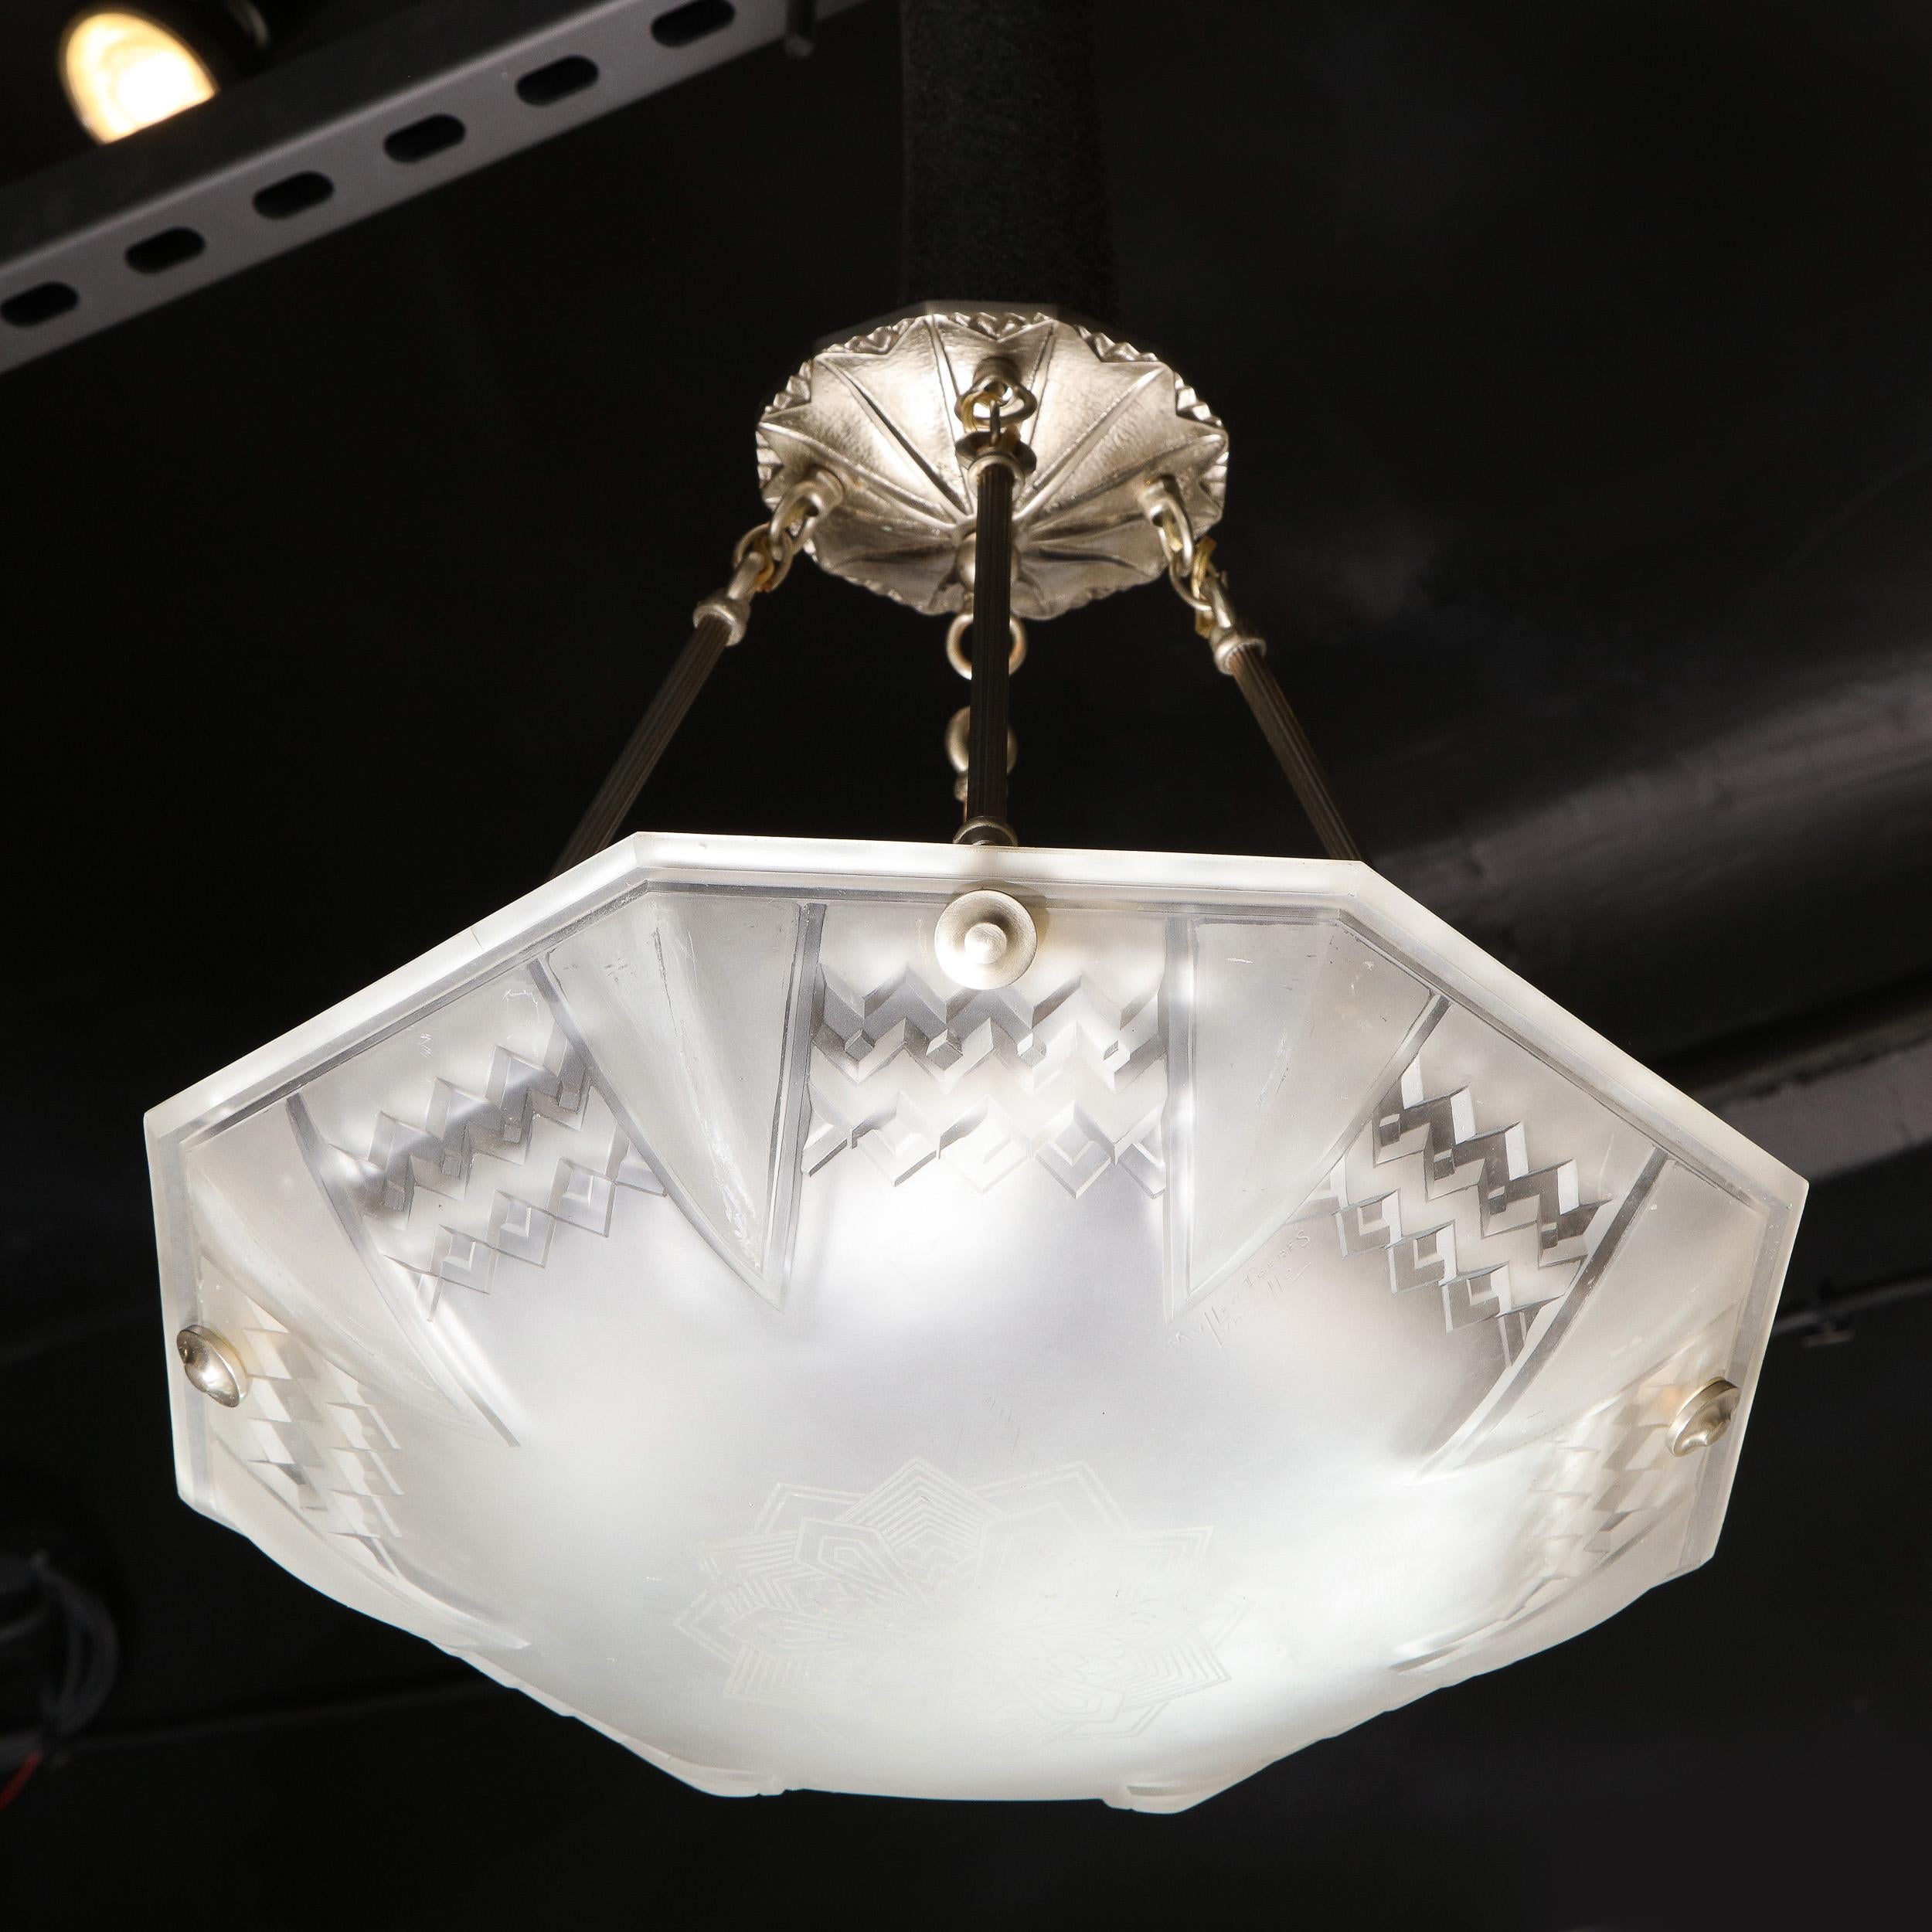 This elegant Art Deco chandelier was realized by the celebrated maker Muller Frères in Luneville, France, circa 1930. It features a subtly concave octagonal form in frosted glass with a double layered cubist diamond motif tracing the perimeter of